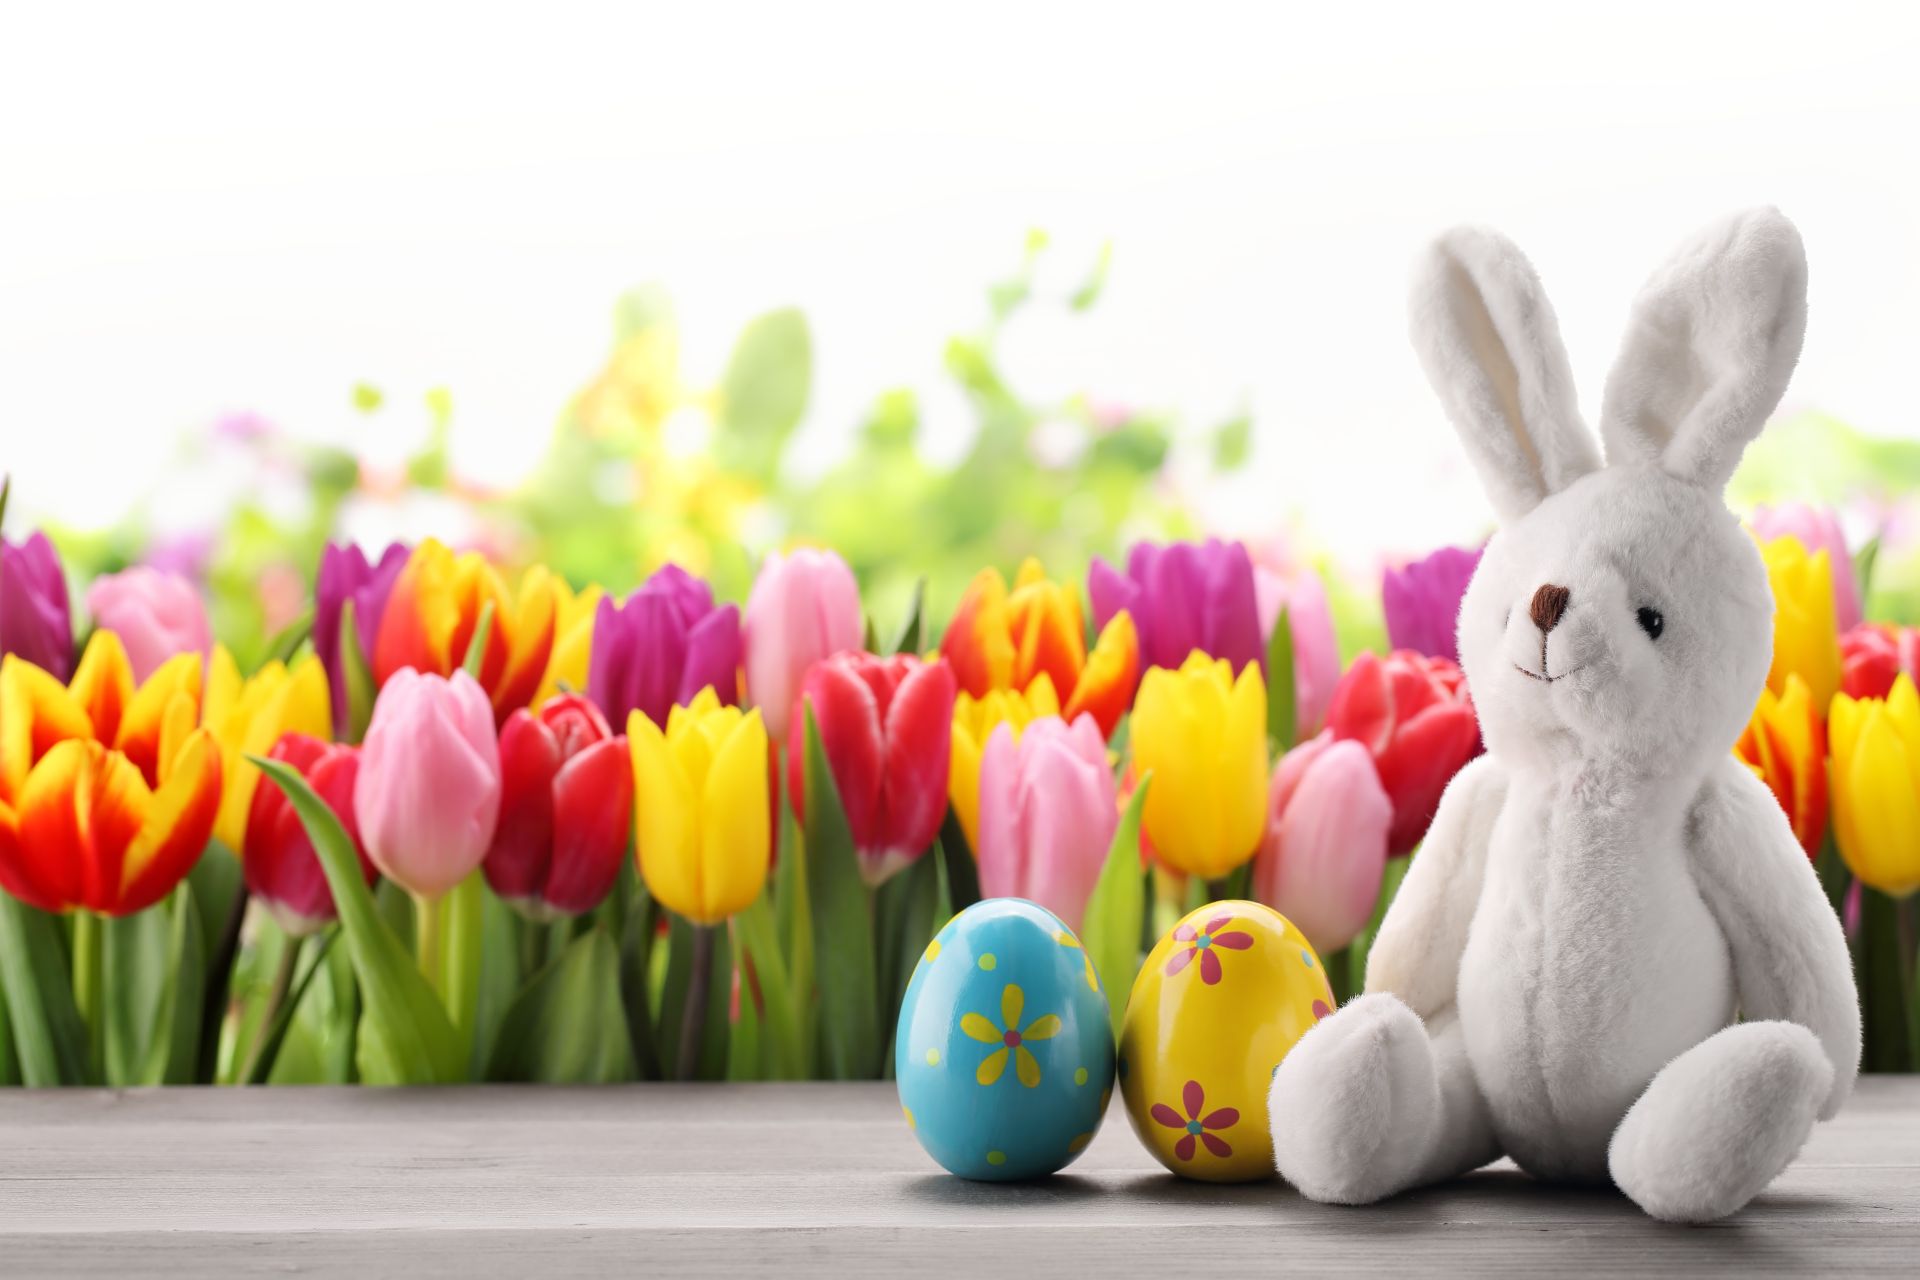 Cute White Easter Bunny And Eggs - Bunny Cute Easter Backgrounds - HD Wallpaper 